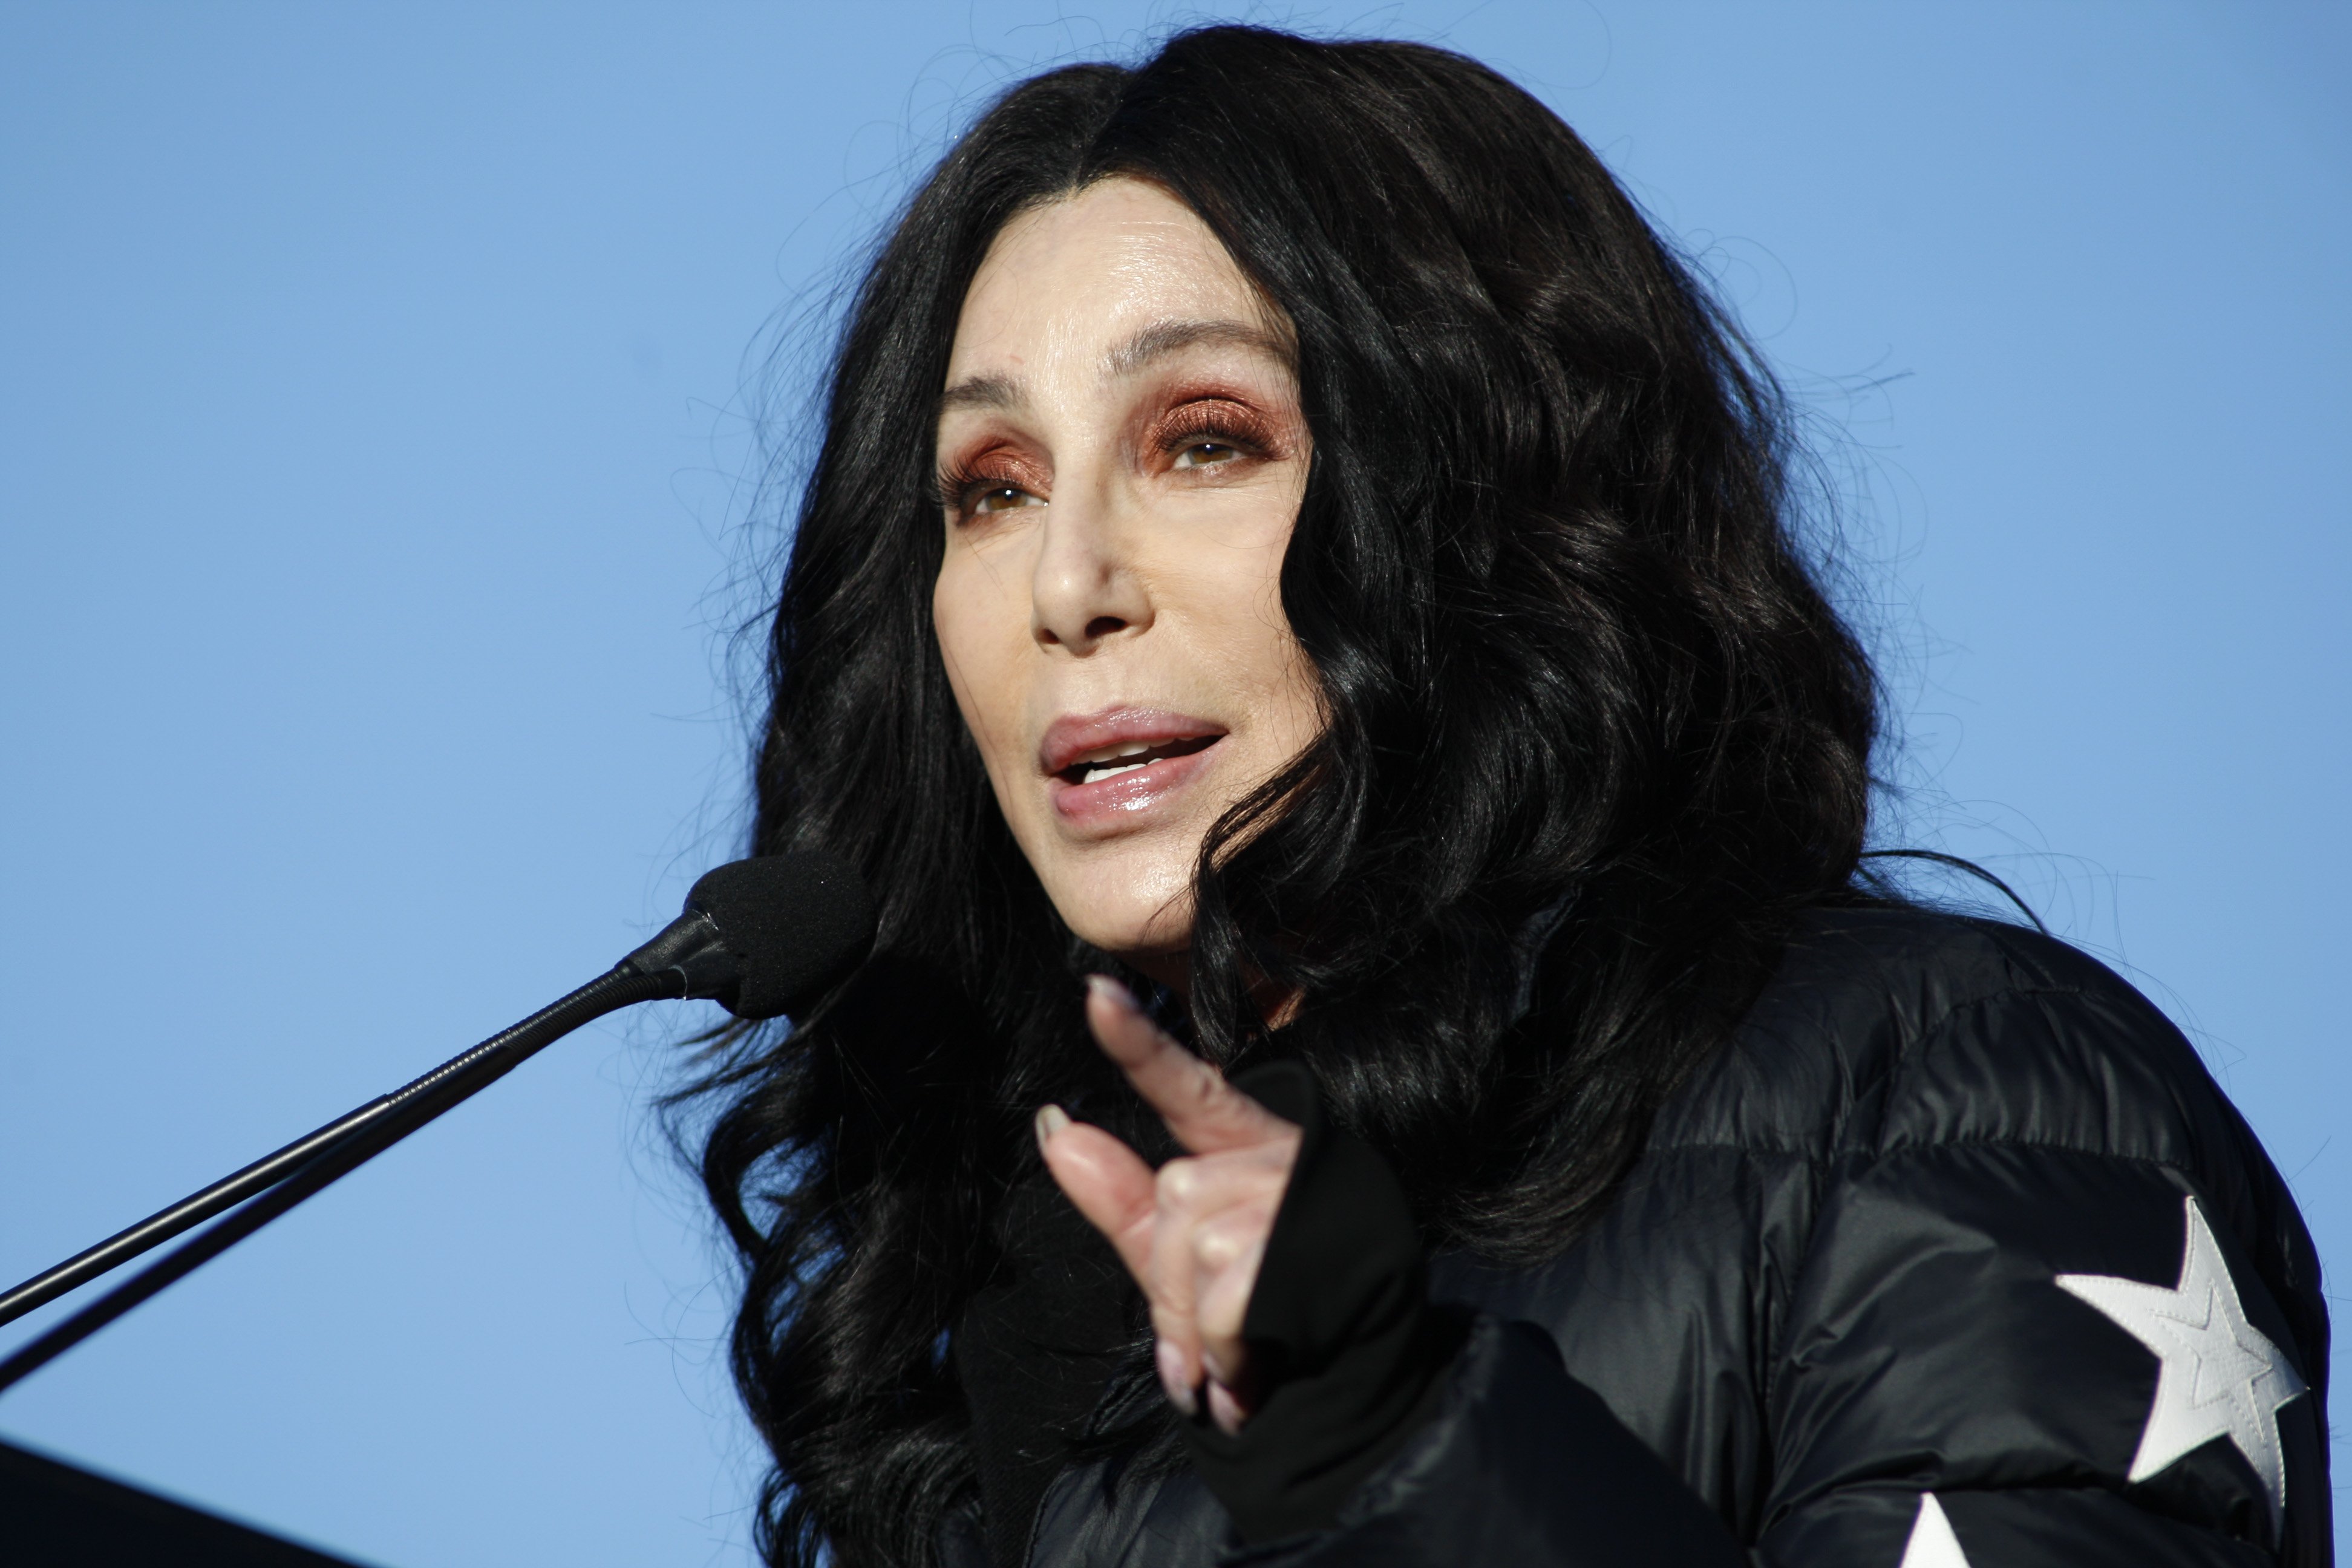 Cher on January 21, 2018, in Las Vegas, Nevada | Source: Getty Images